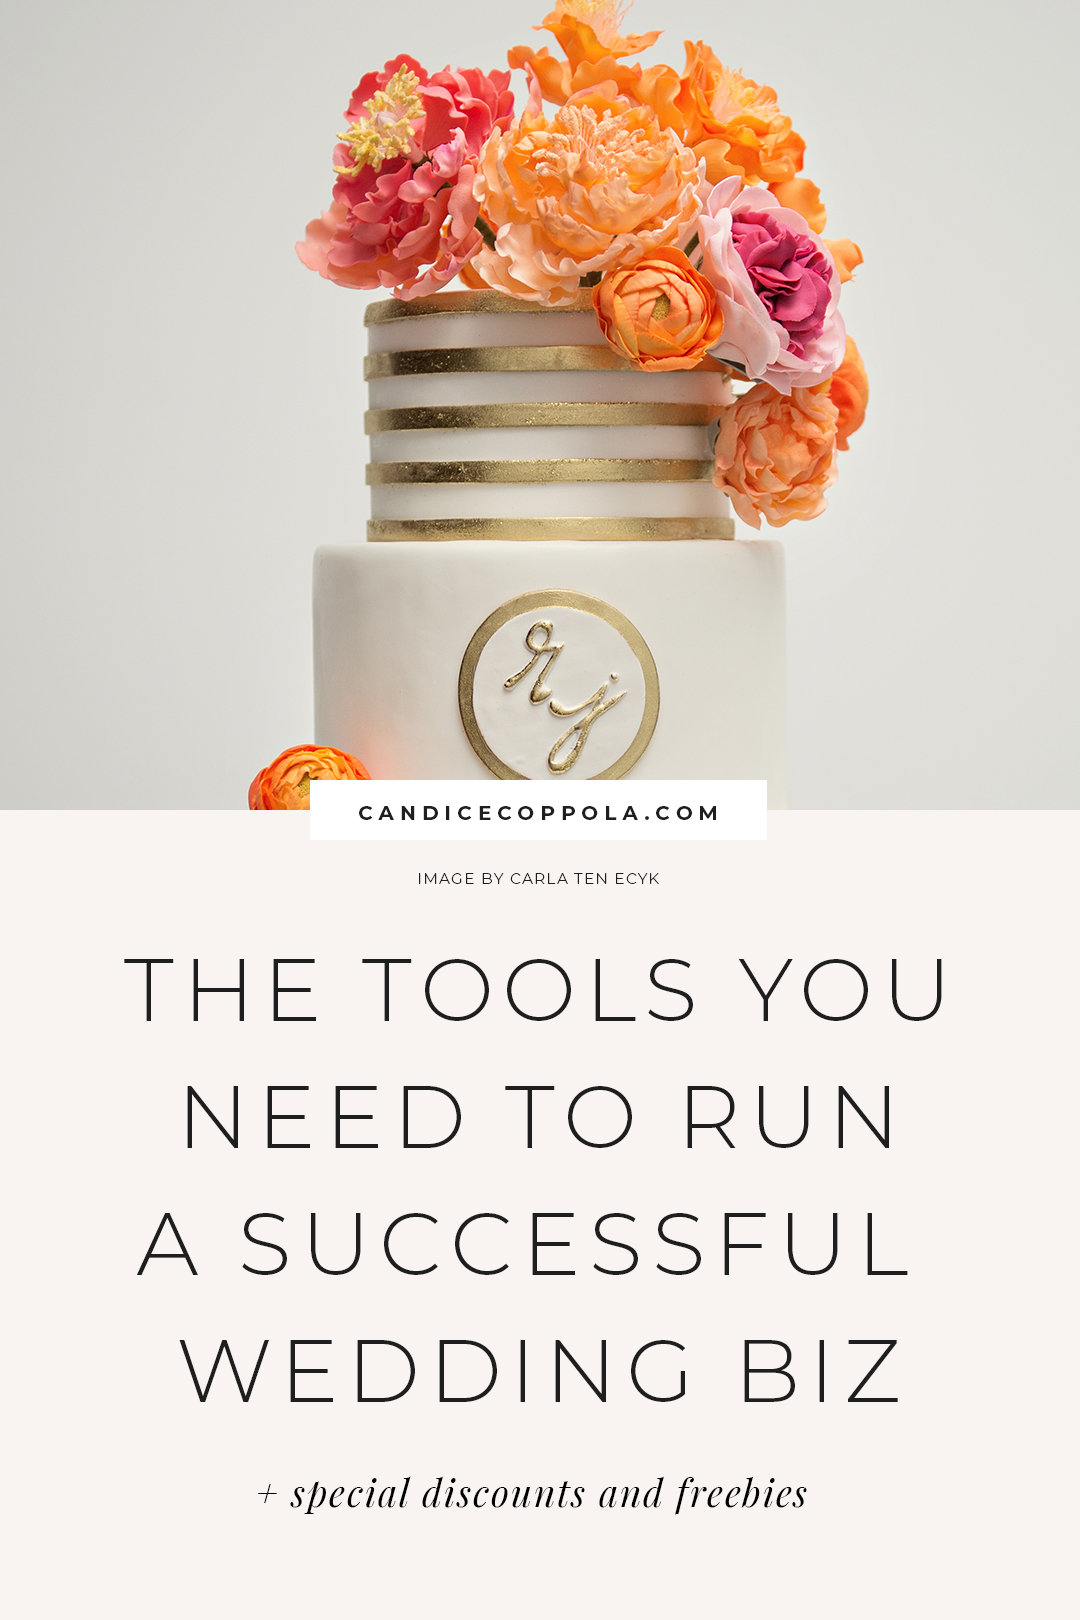 Are you searching for the right tools to run your wedding planning business? Learn more about the tools I used to plan luxury weddings for my clients, and receive special discounts and freebies! #weddingplannerbiz #businesstools